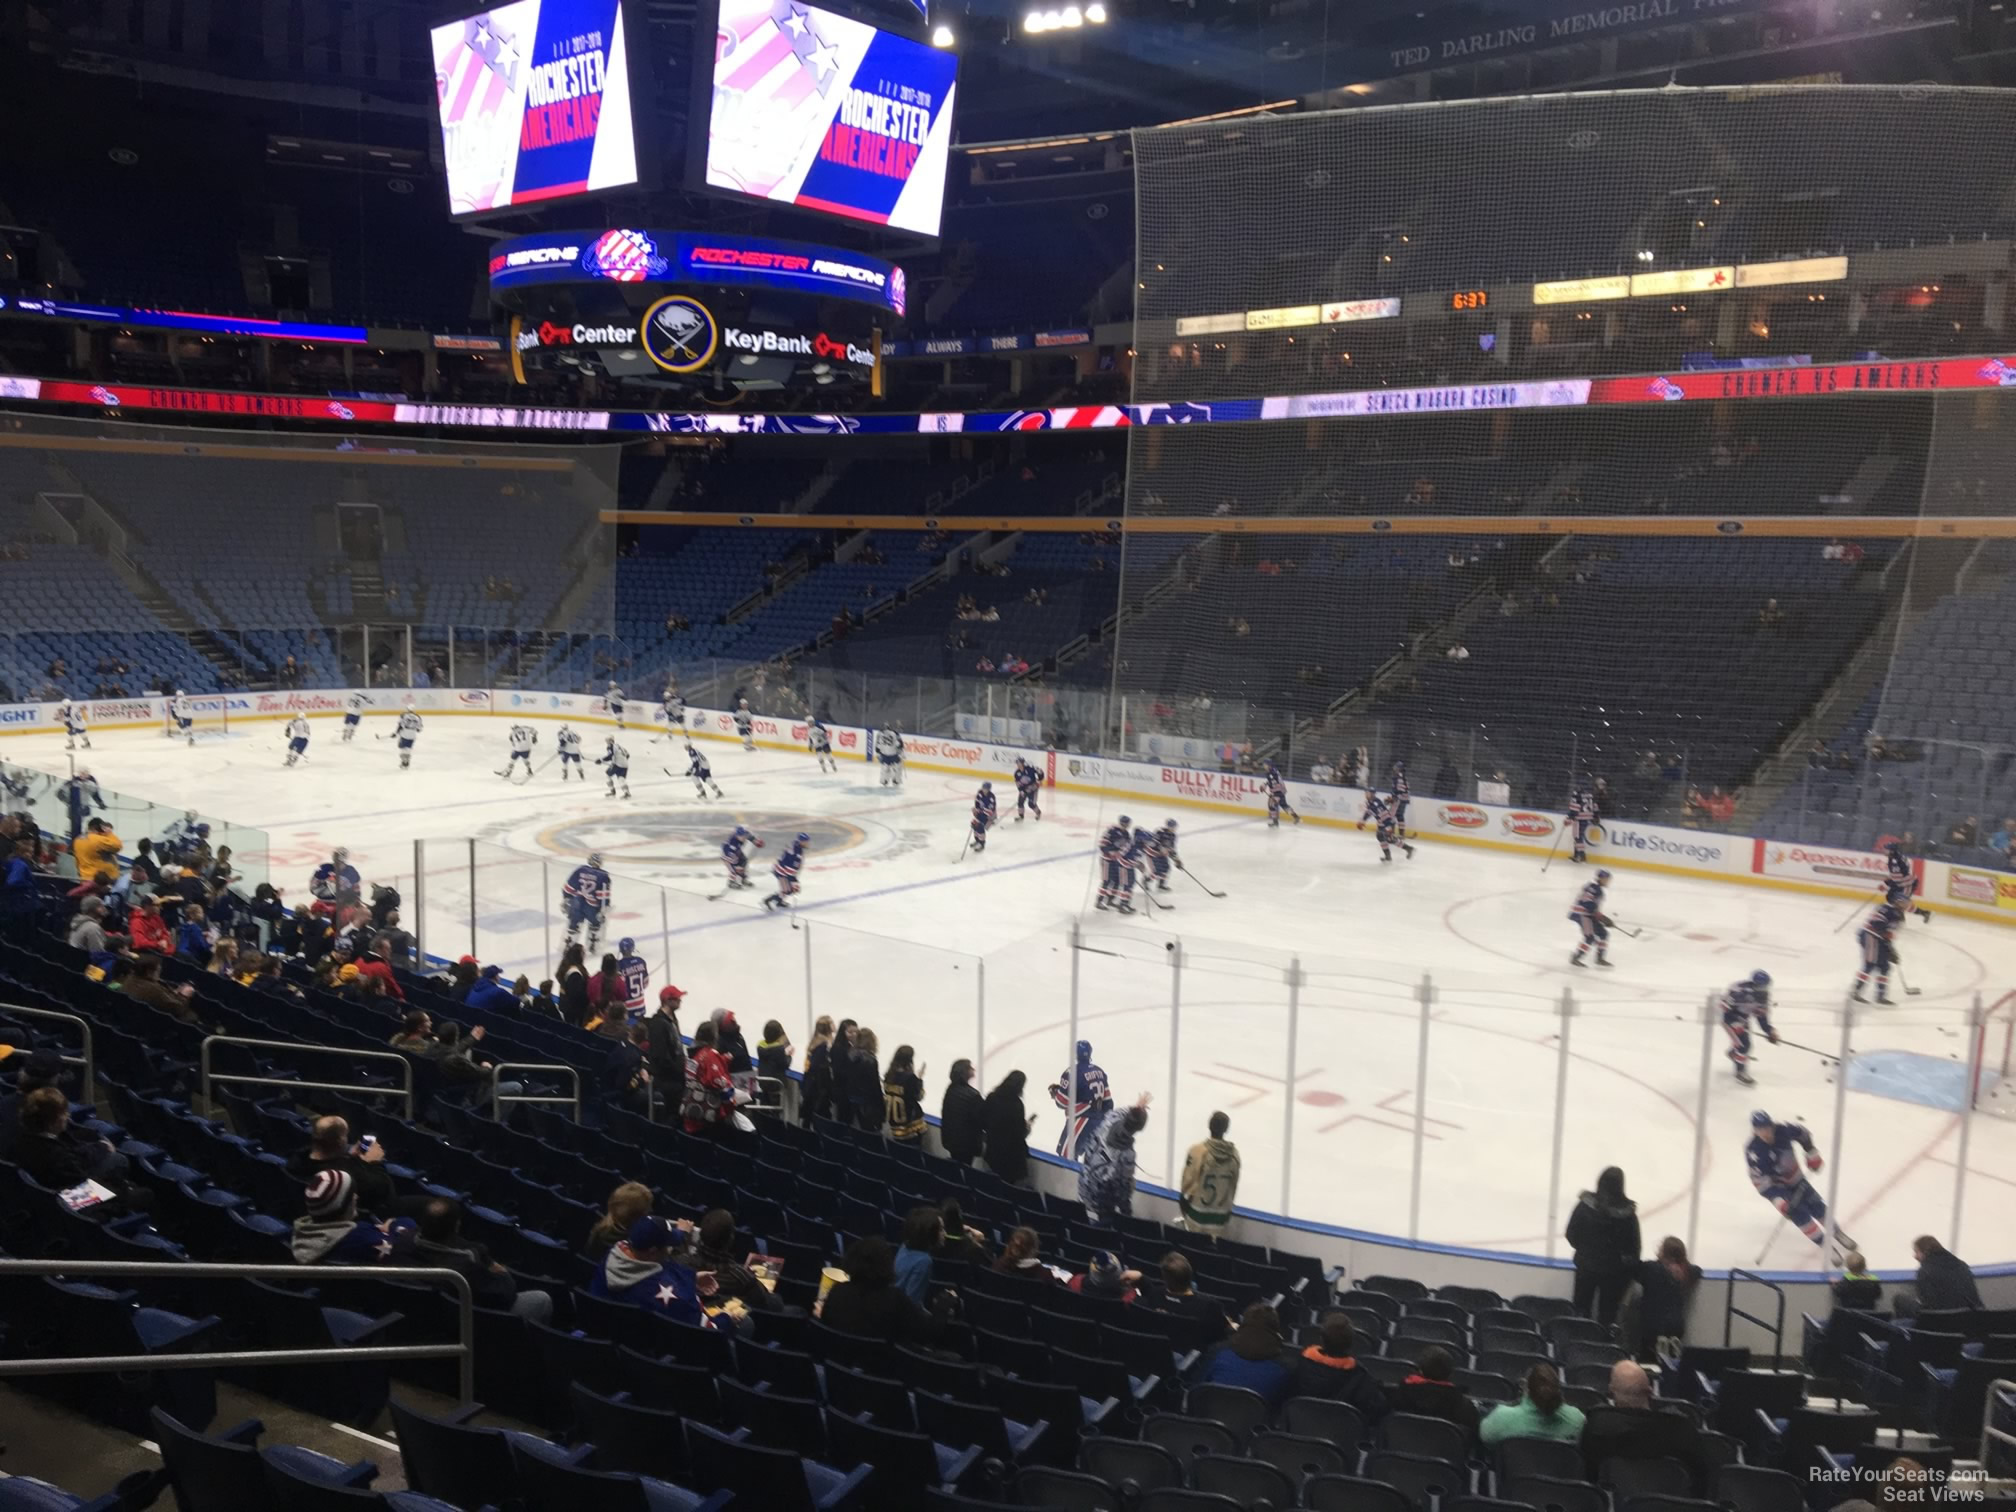 section 102, row 22 seat view  for hockey - keybank center